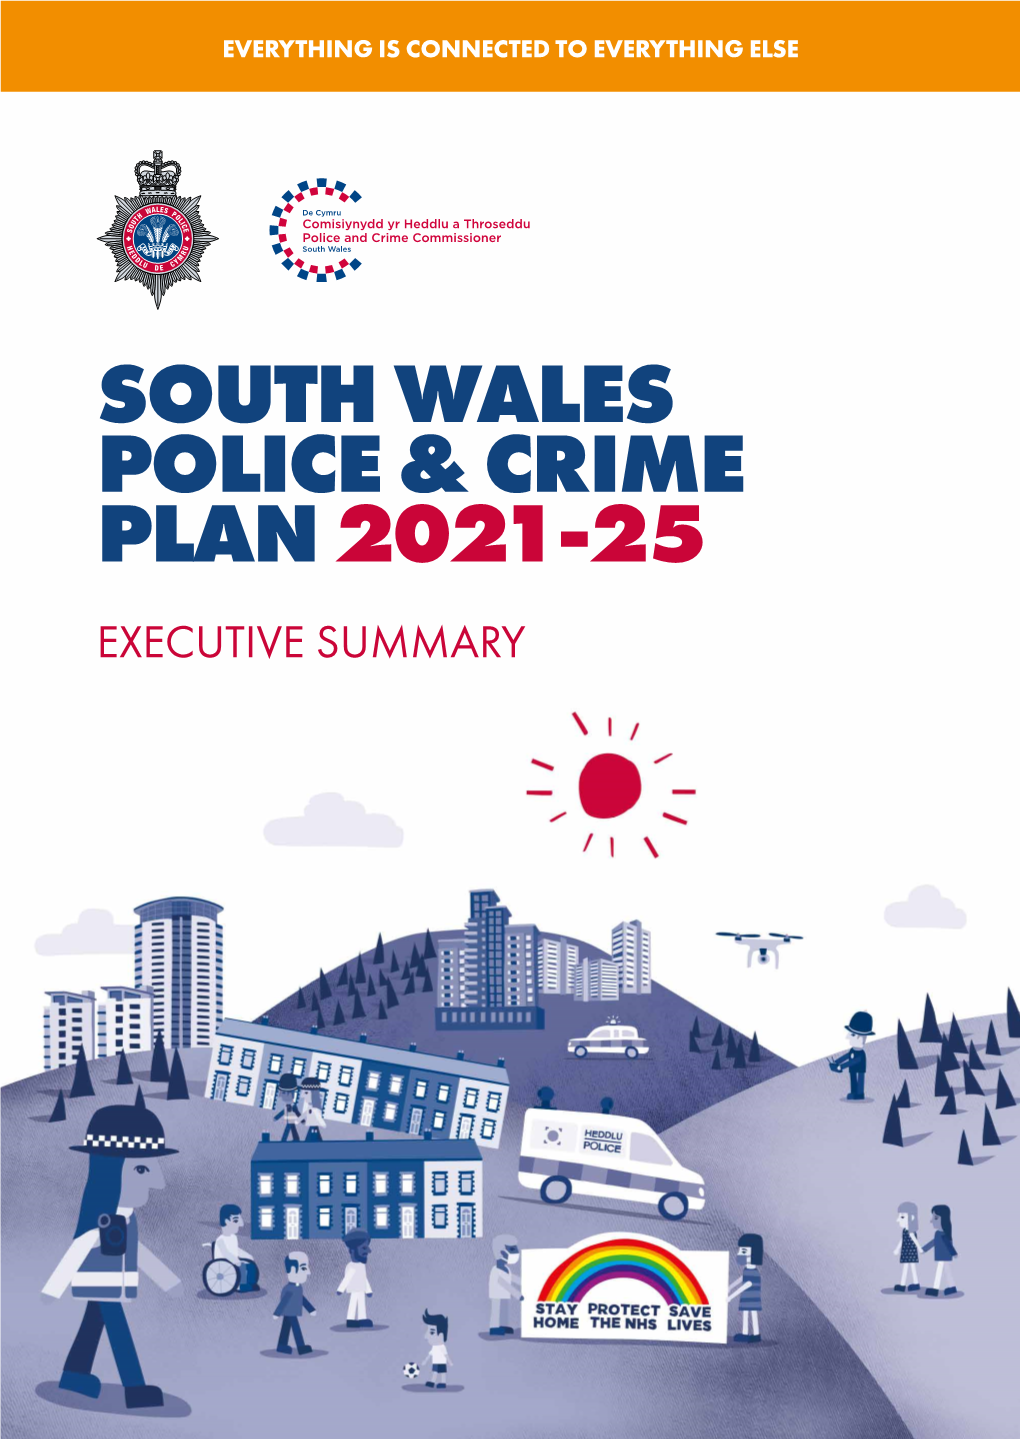 South Wales Police & Crime Plan 2021-25